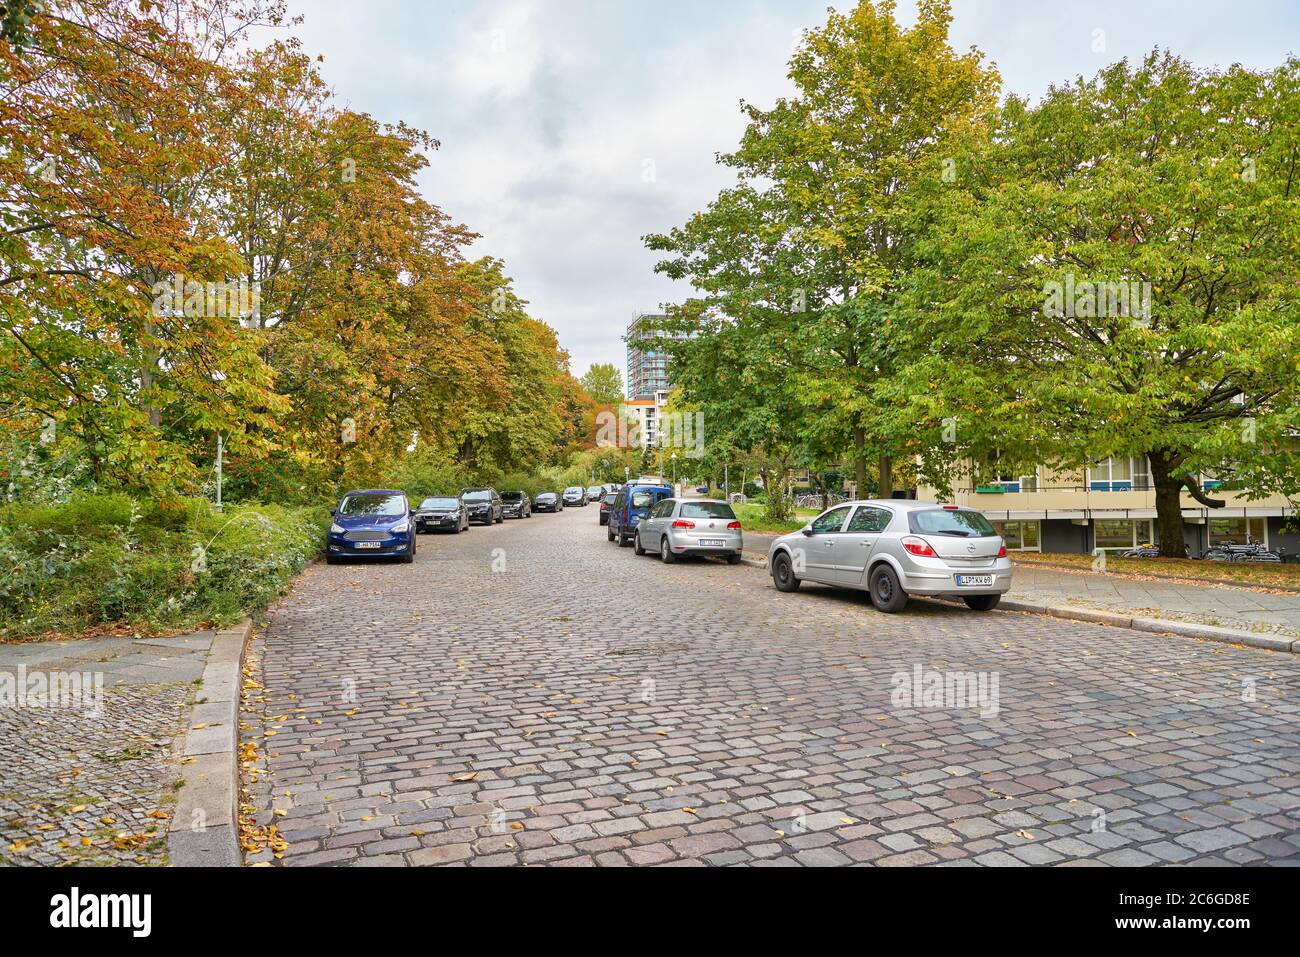 BERLIN, GERMANY - CIRCA SEPTEMBER, 2019: street level view of a road in Berlin in the daytime. Stock Photo